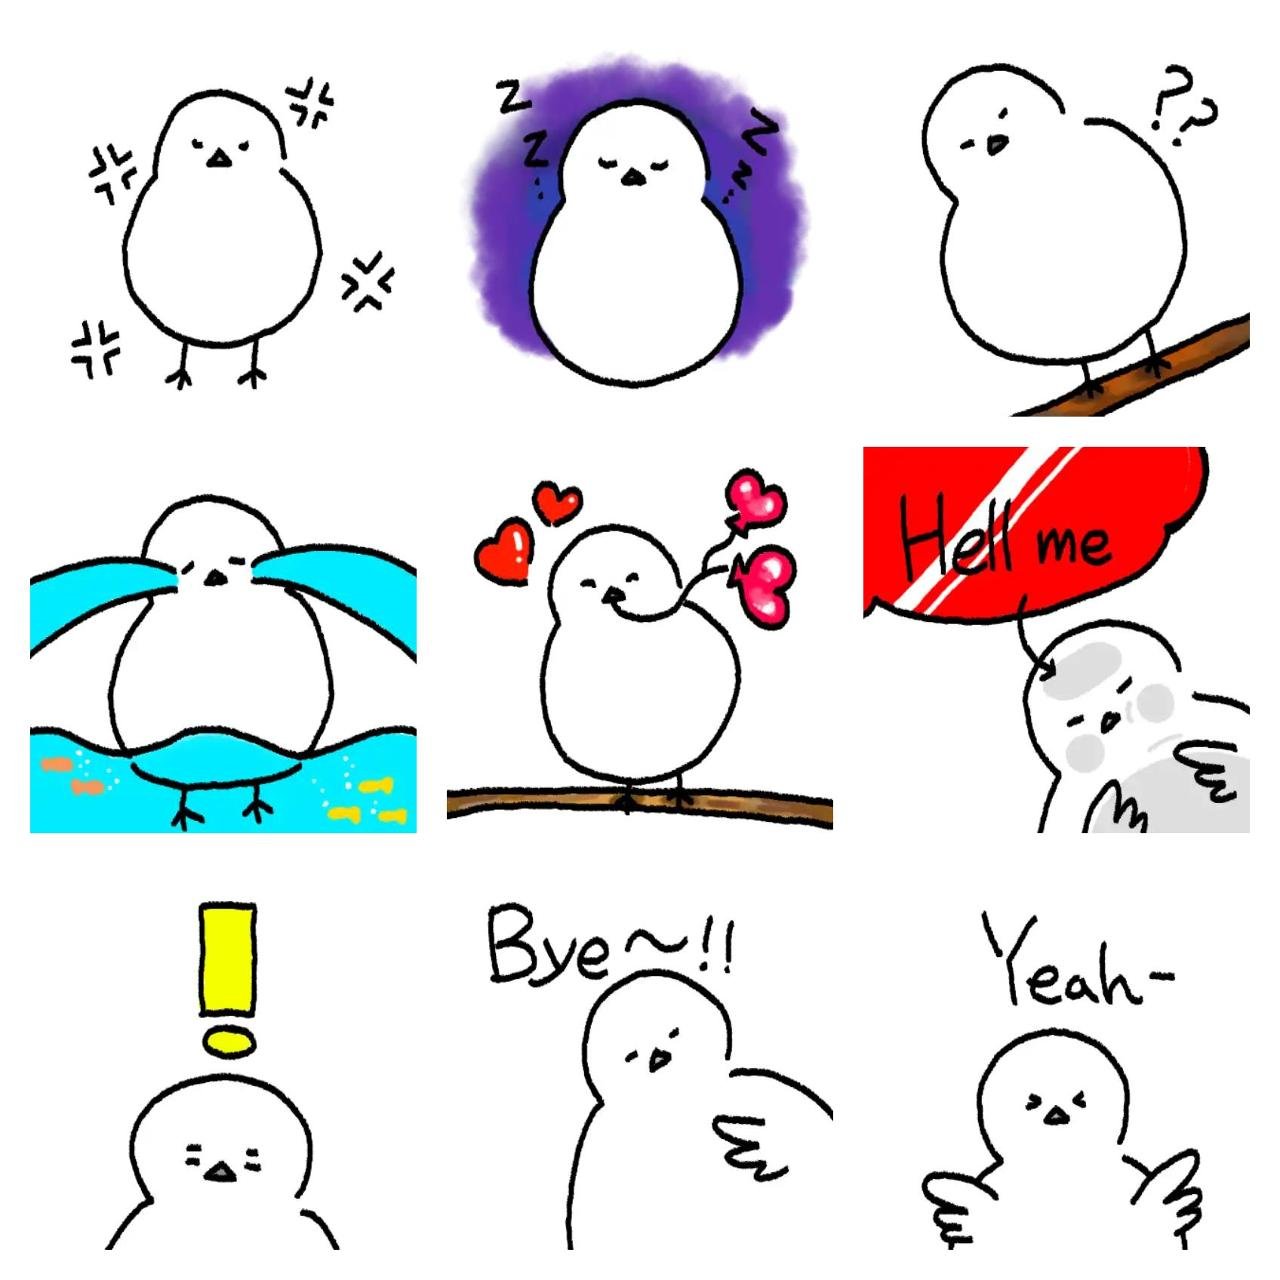 Korean crow-tit Animals sticker pack for Whatsapp, Telegram, Signal, and others chatting and message apps